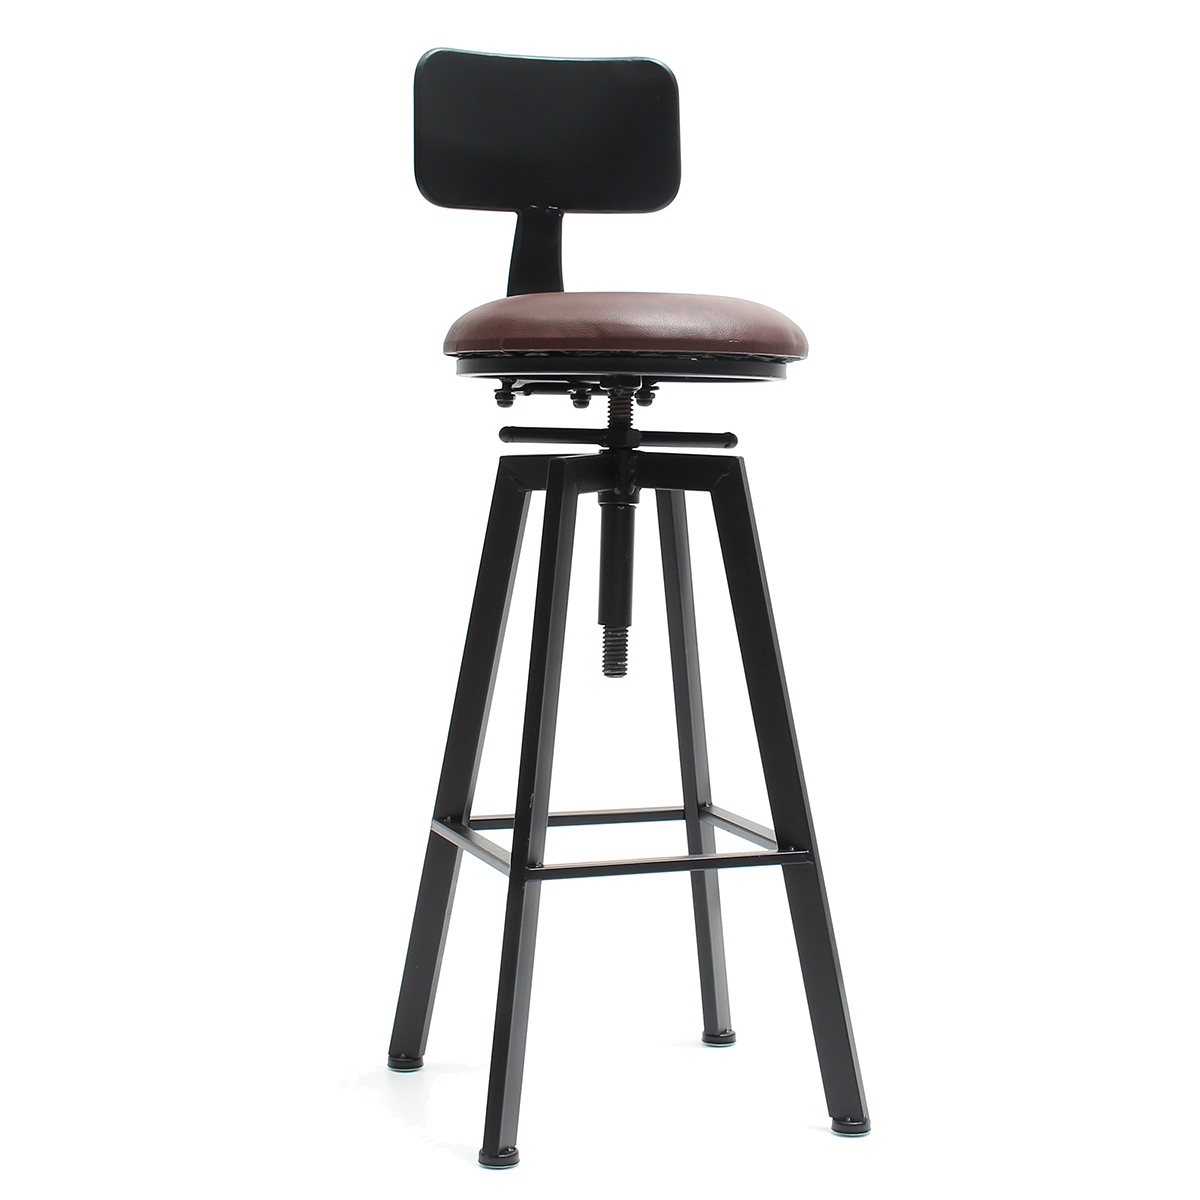 

Adjustable Retro Bar Stool Metal Leather Craft Furniture Rotate Cafe Counter Chair Bar Decorations